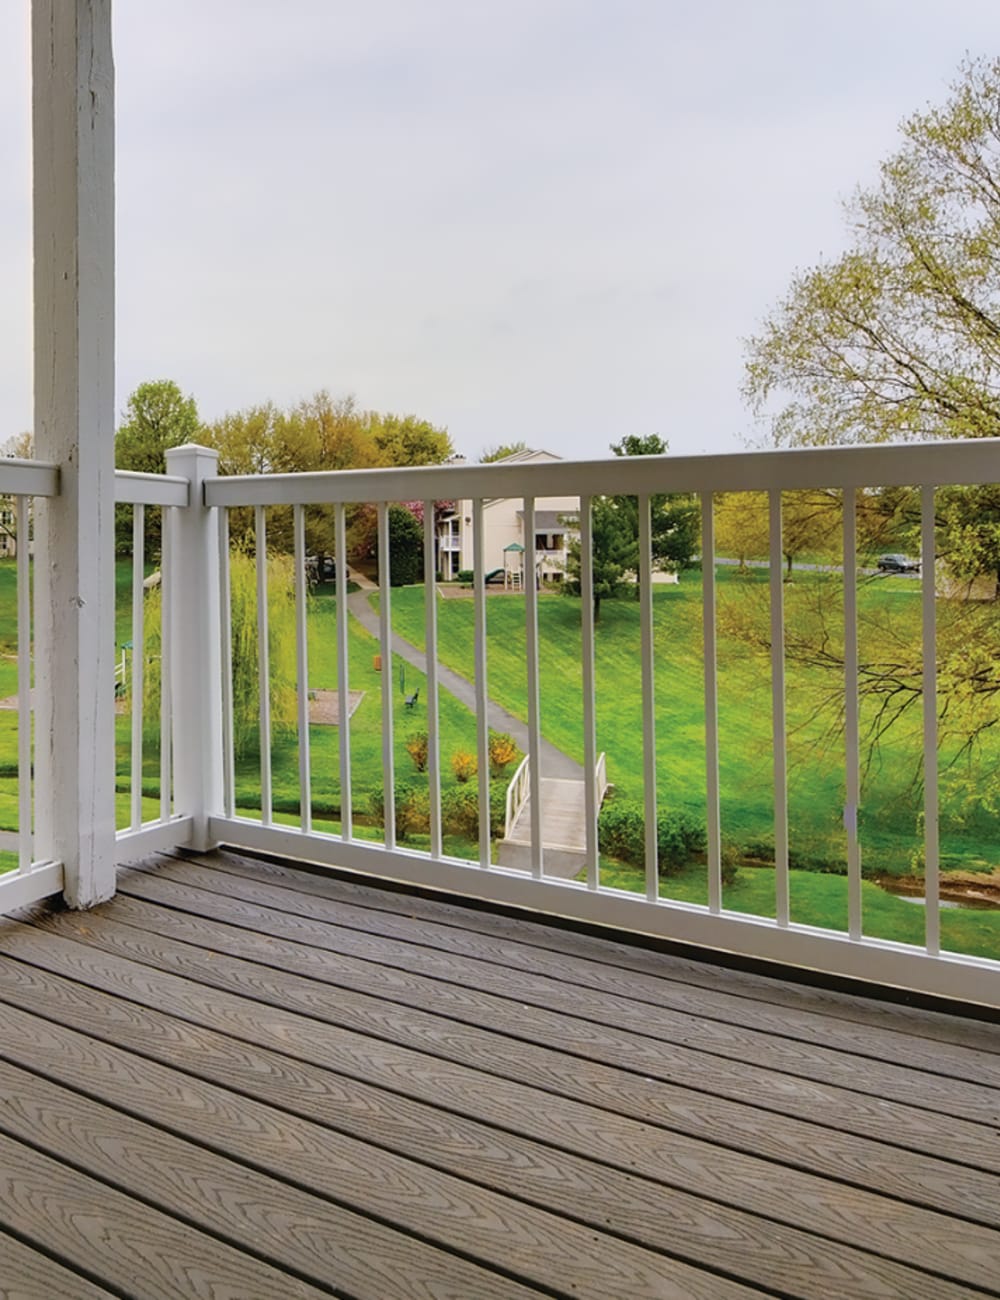 An apartment balcony at Stonecreek Club in Germantown, Maryland